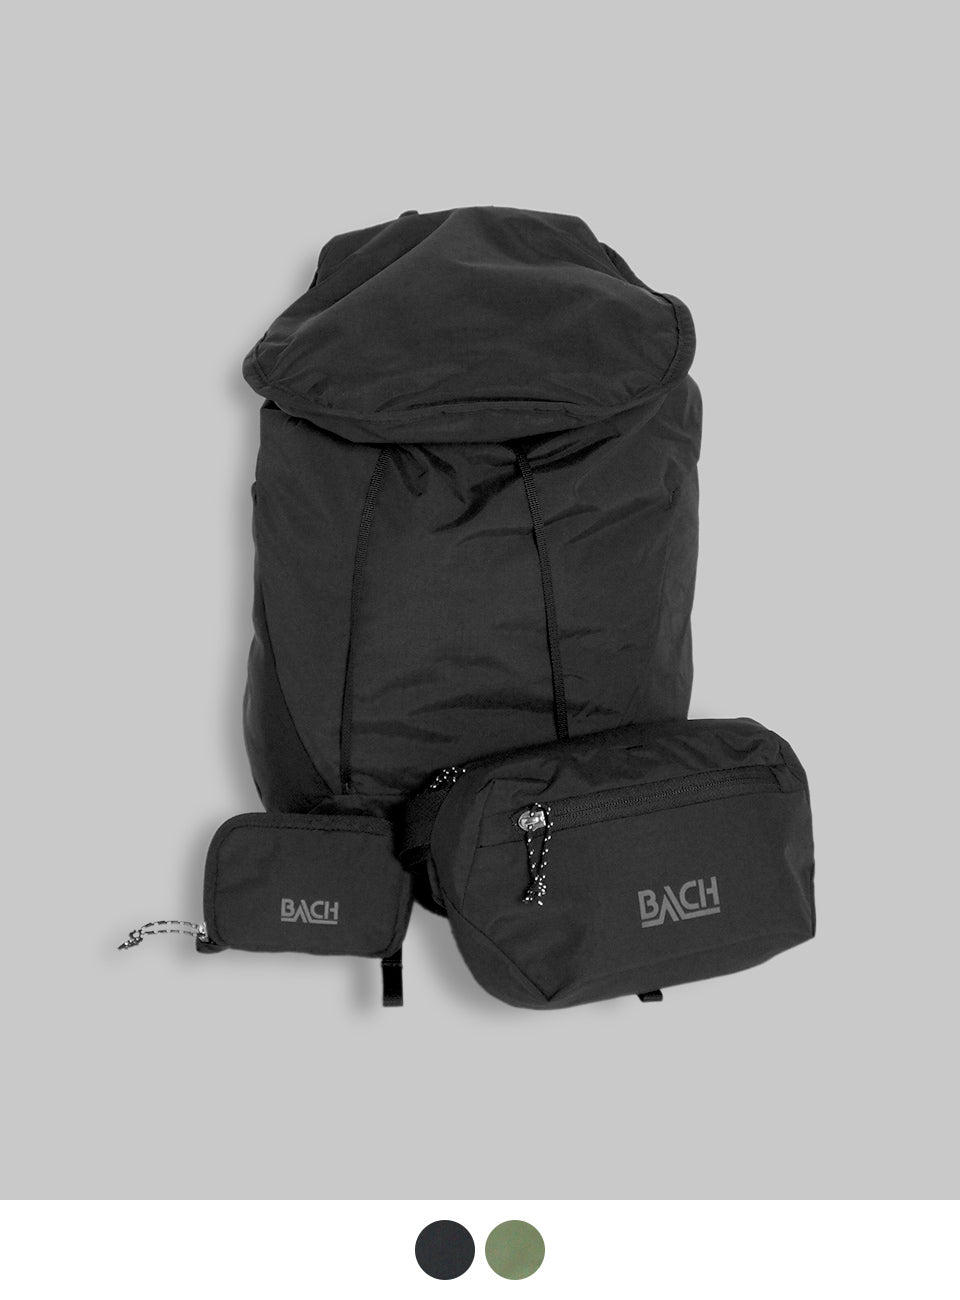 BACH バッハ 【3点セット】ITSY BITSY FAMILY BACKPACK SET, WALLET and POUCH_3pcs  バックパック リュック 20L ショルダーバッグ ポーチ 財布 ウォレット   24S-420986SET【送料無料】